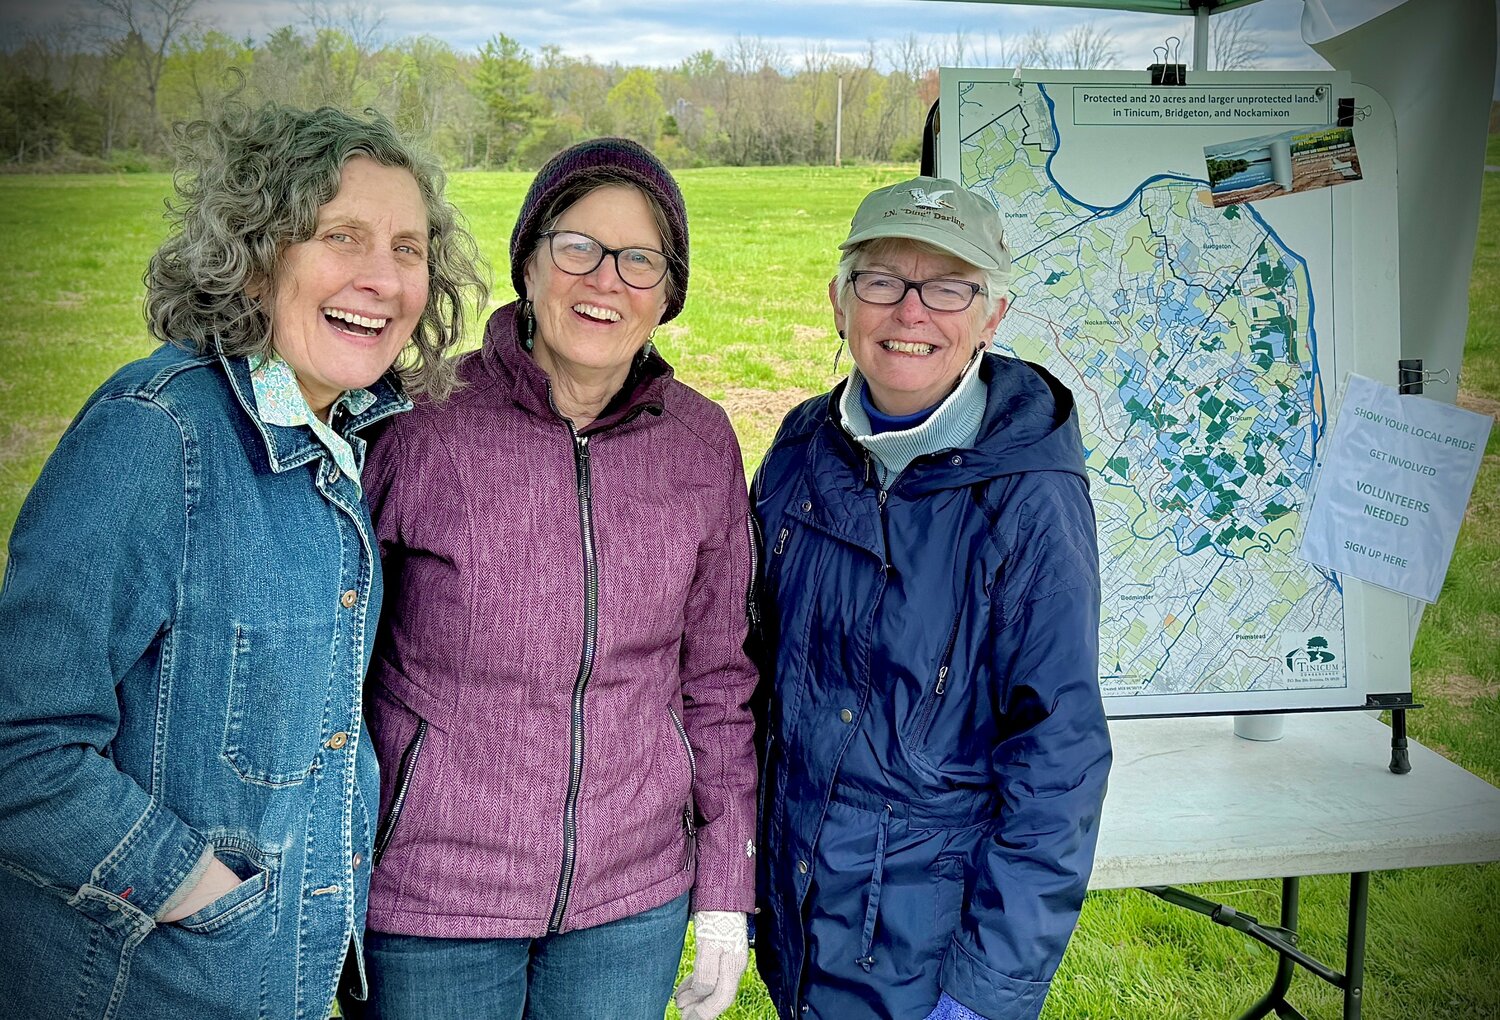 Enjoying the Tinicum Earth Day Fair are, from left, EAC’s Cindi Gasparre, of the township’s Environmental Advisory Committee, Tinicum Conservancy volunteer Ros Cahill and Conservancy board of trustees member Peggy Enoch.